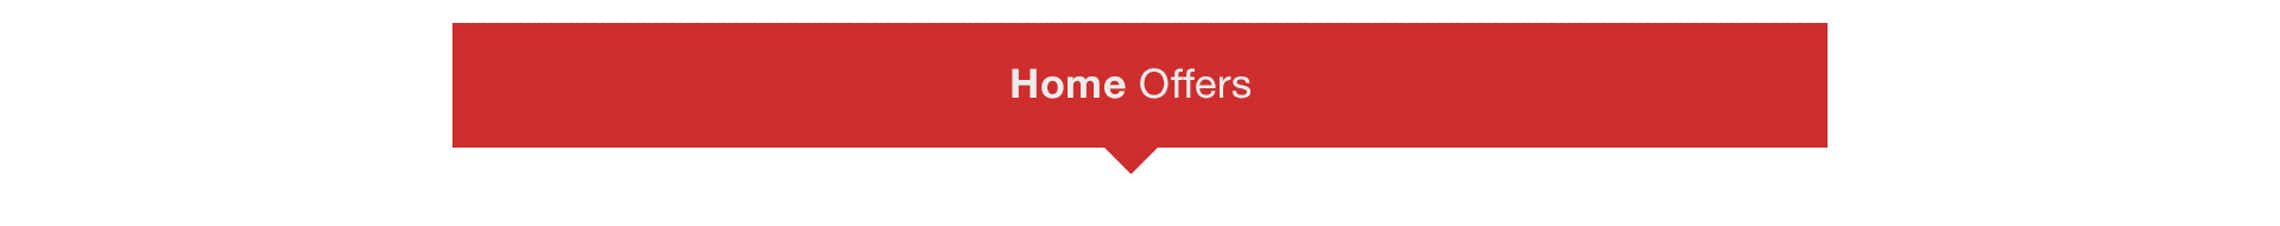 Home Offers